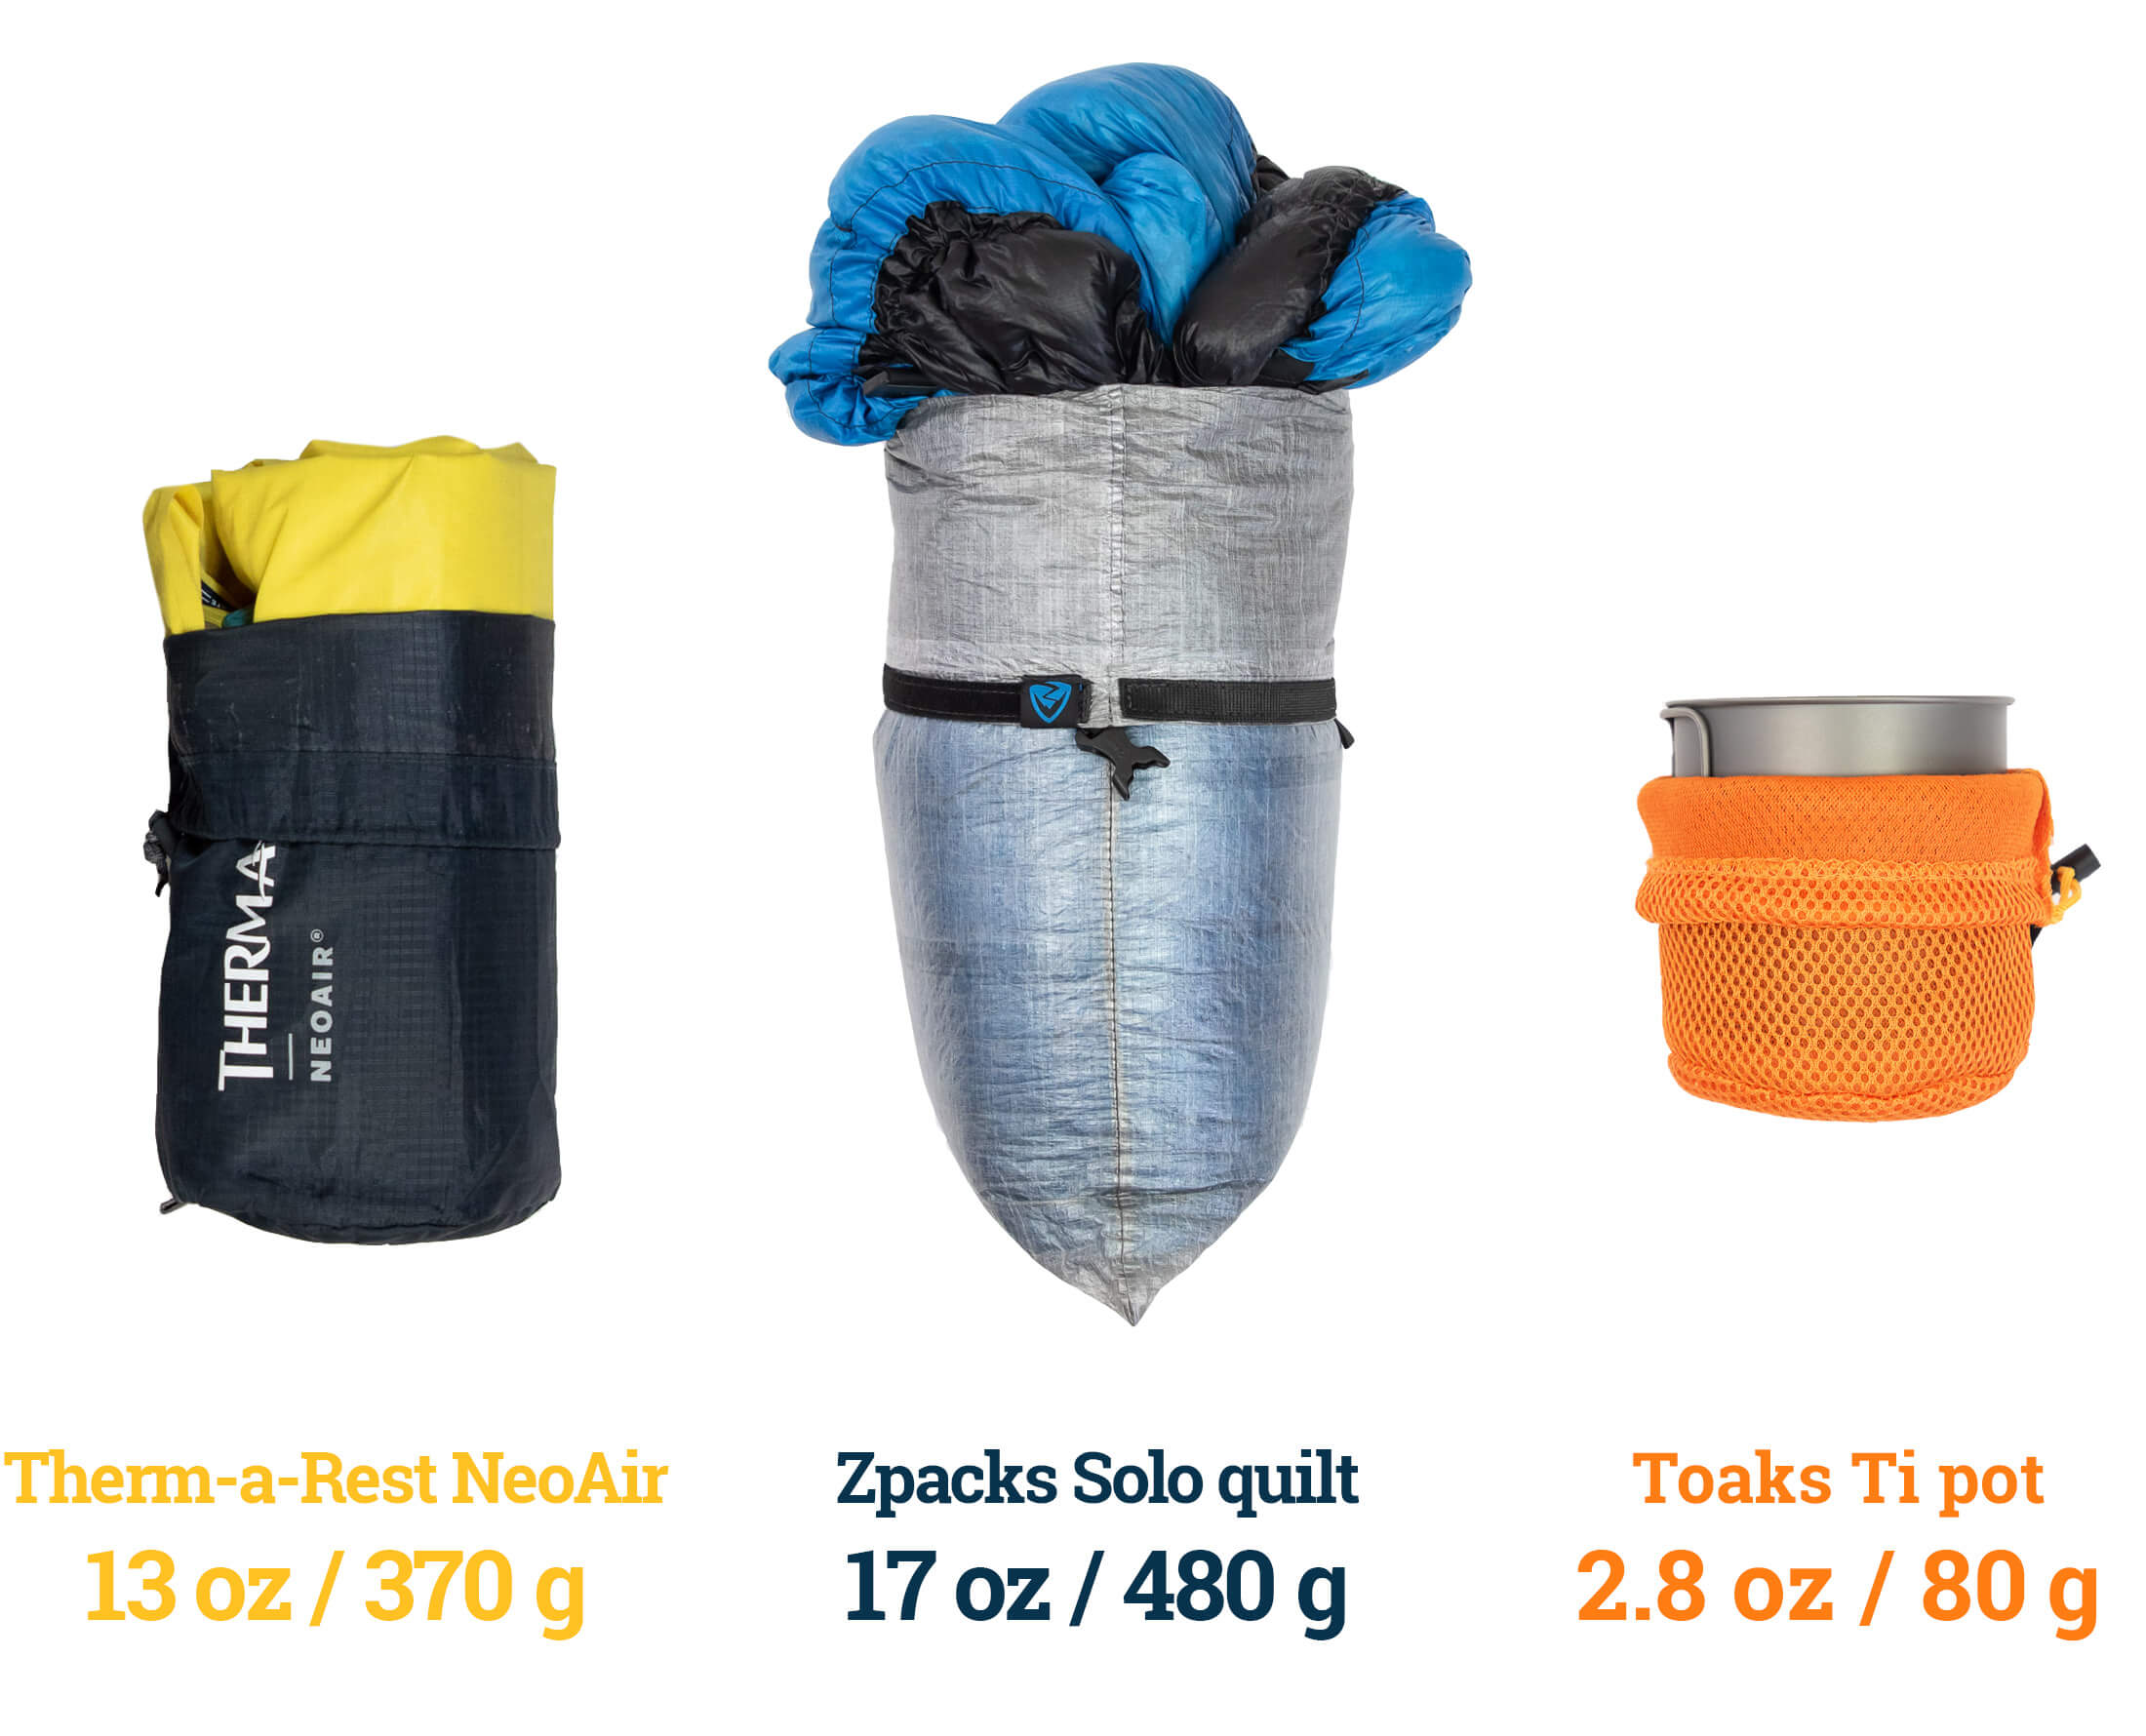 ultralight sleeping pad, backpacking quilt and pot